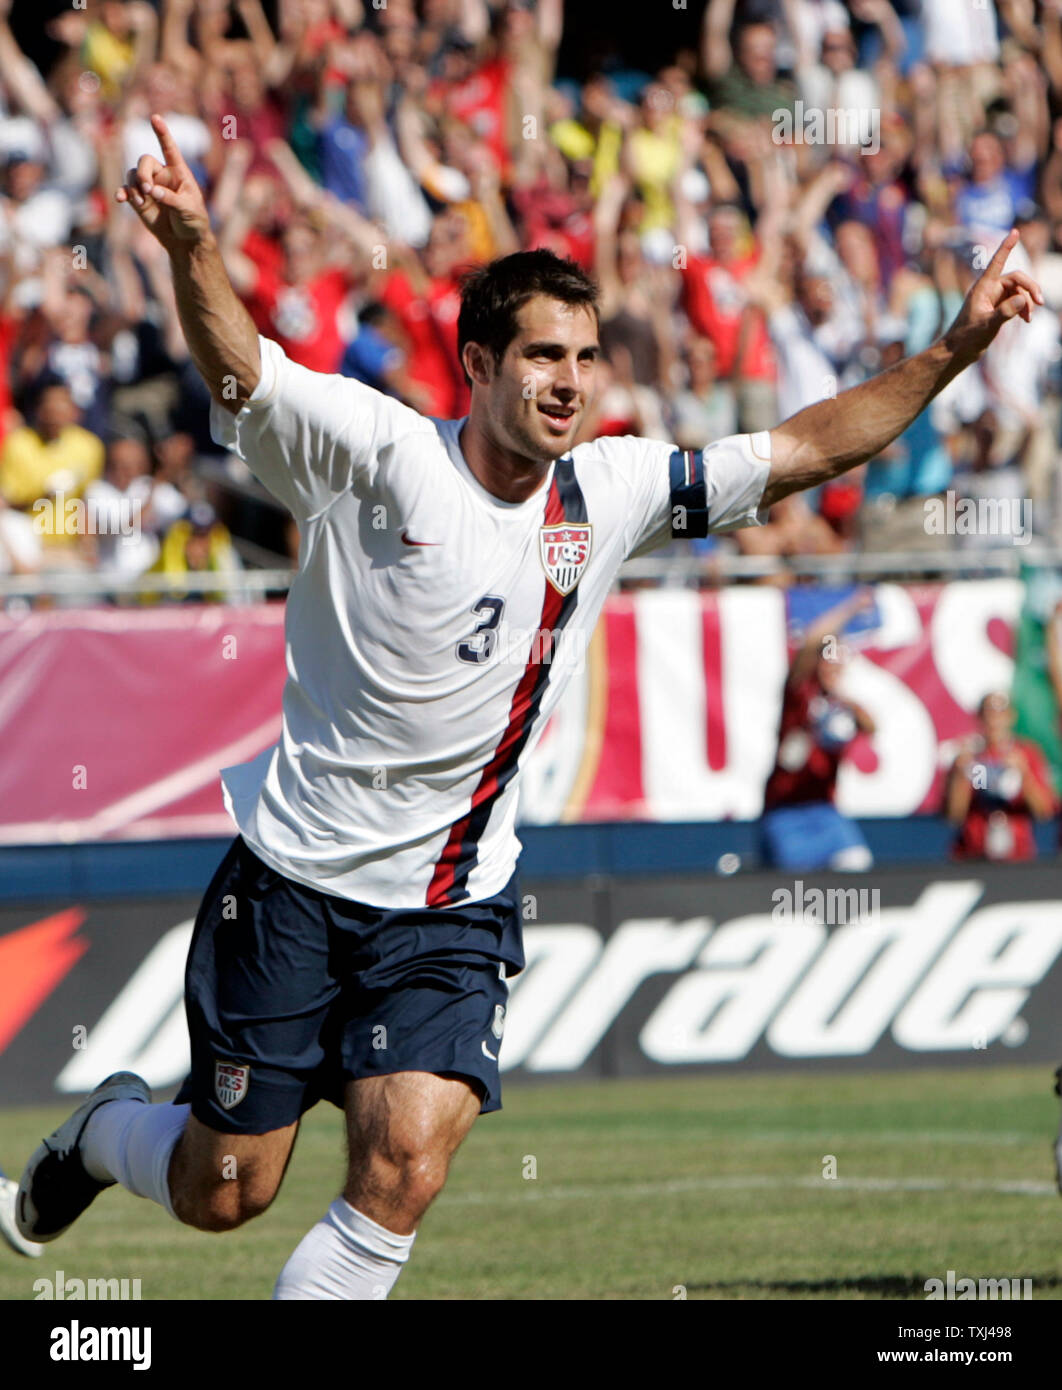 USA defender Carlos Bocanegra celebrates scoring a first half goal against Brazil at Soldier Field in Chicago, September 9, 2007. Brazil defeated the USA 4-2 in their international friendly soccer match.      (UPI Photo/Mark Cowan) Stock Photo